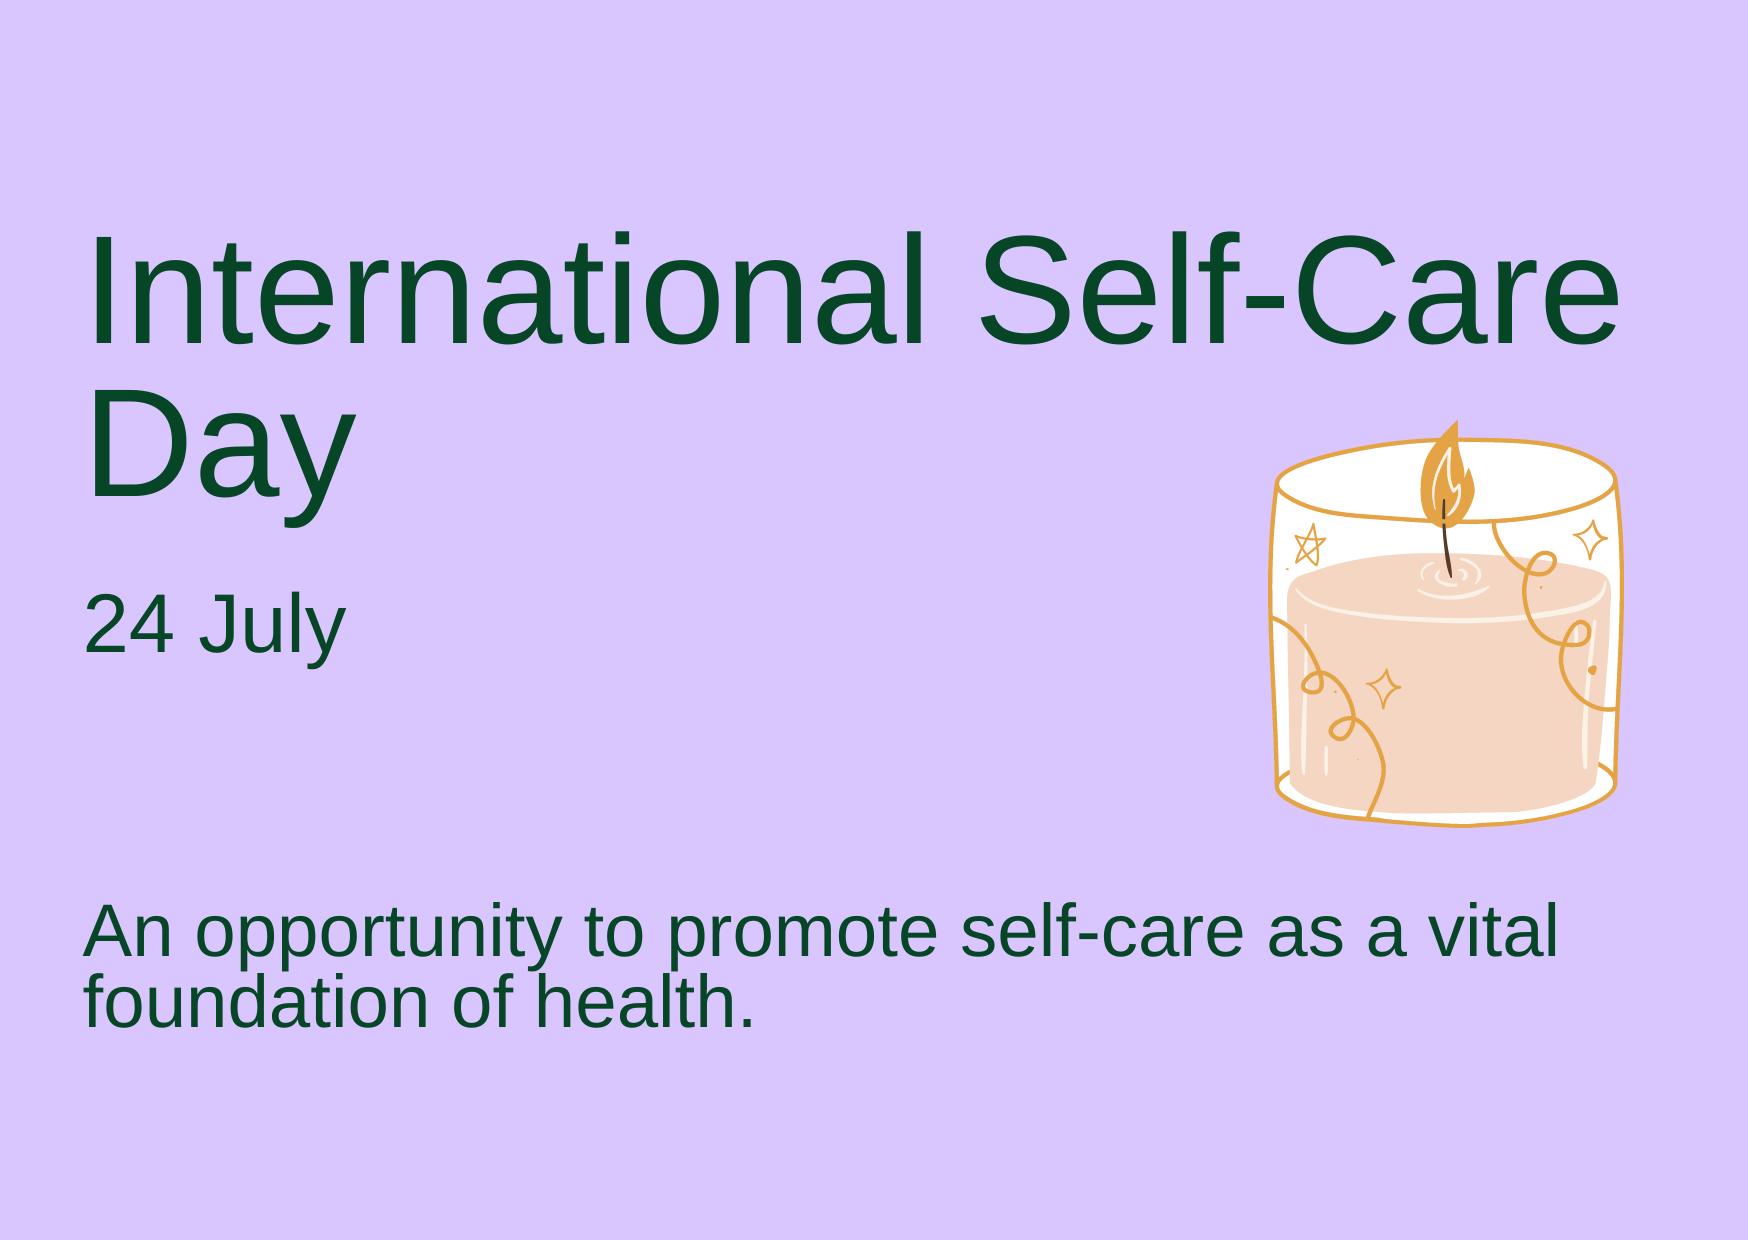 International Self-Care Day, 24 July, An opportunity to promote self-care as a vital foundation of health.